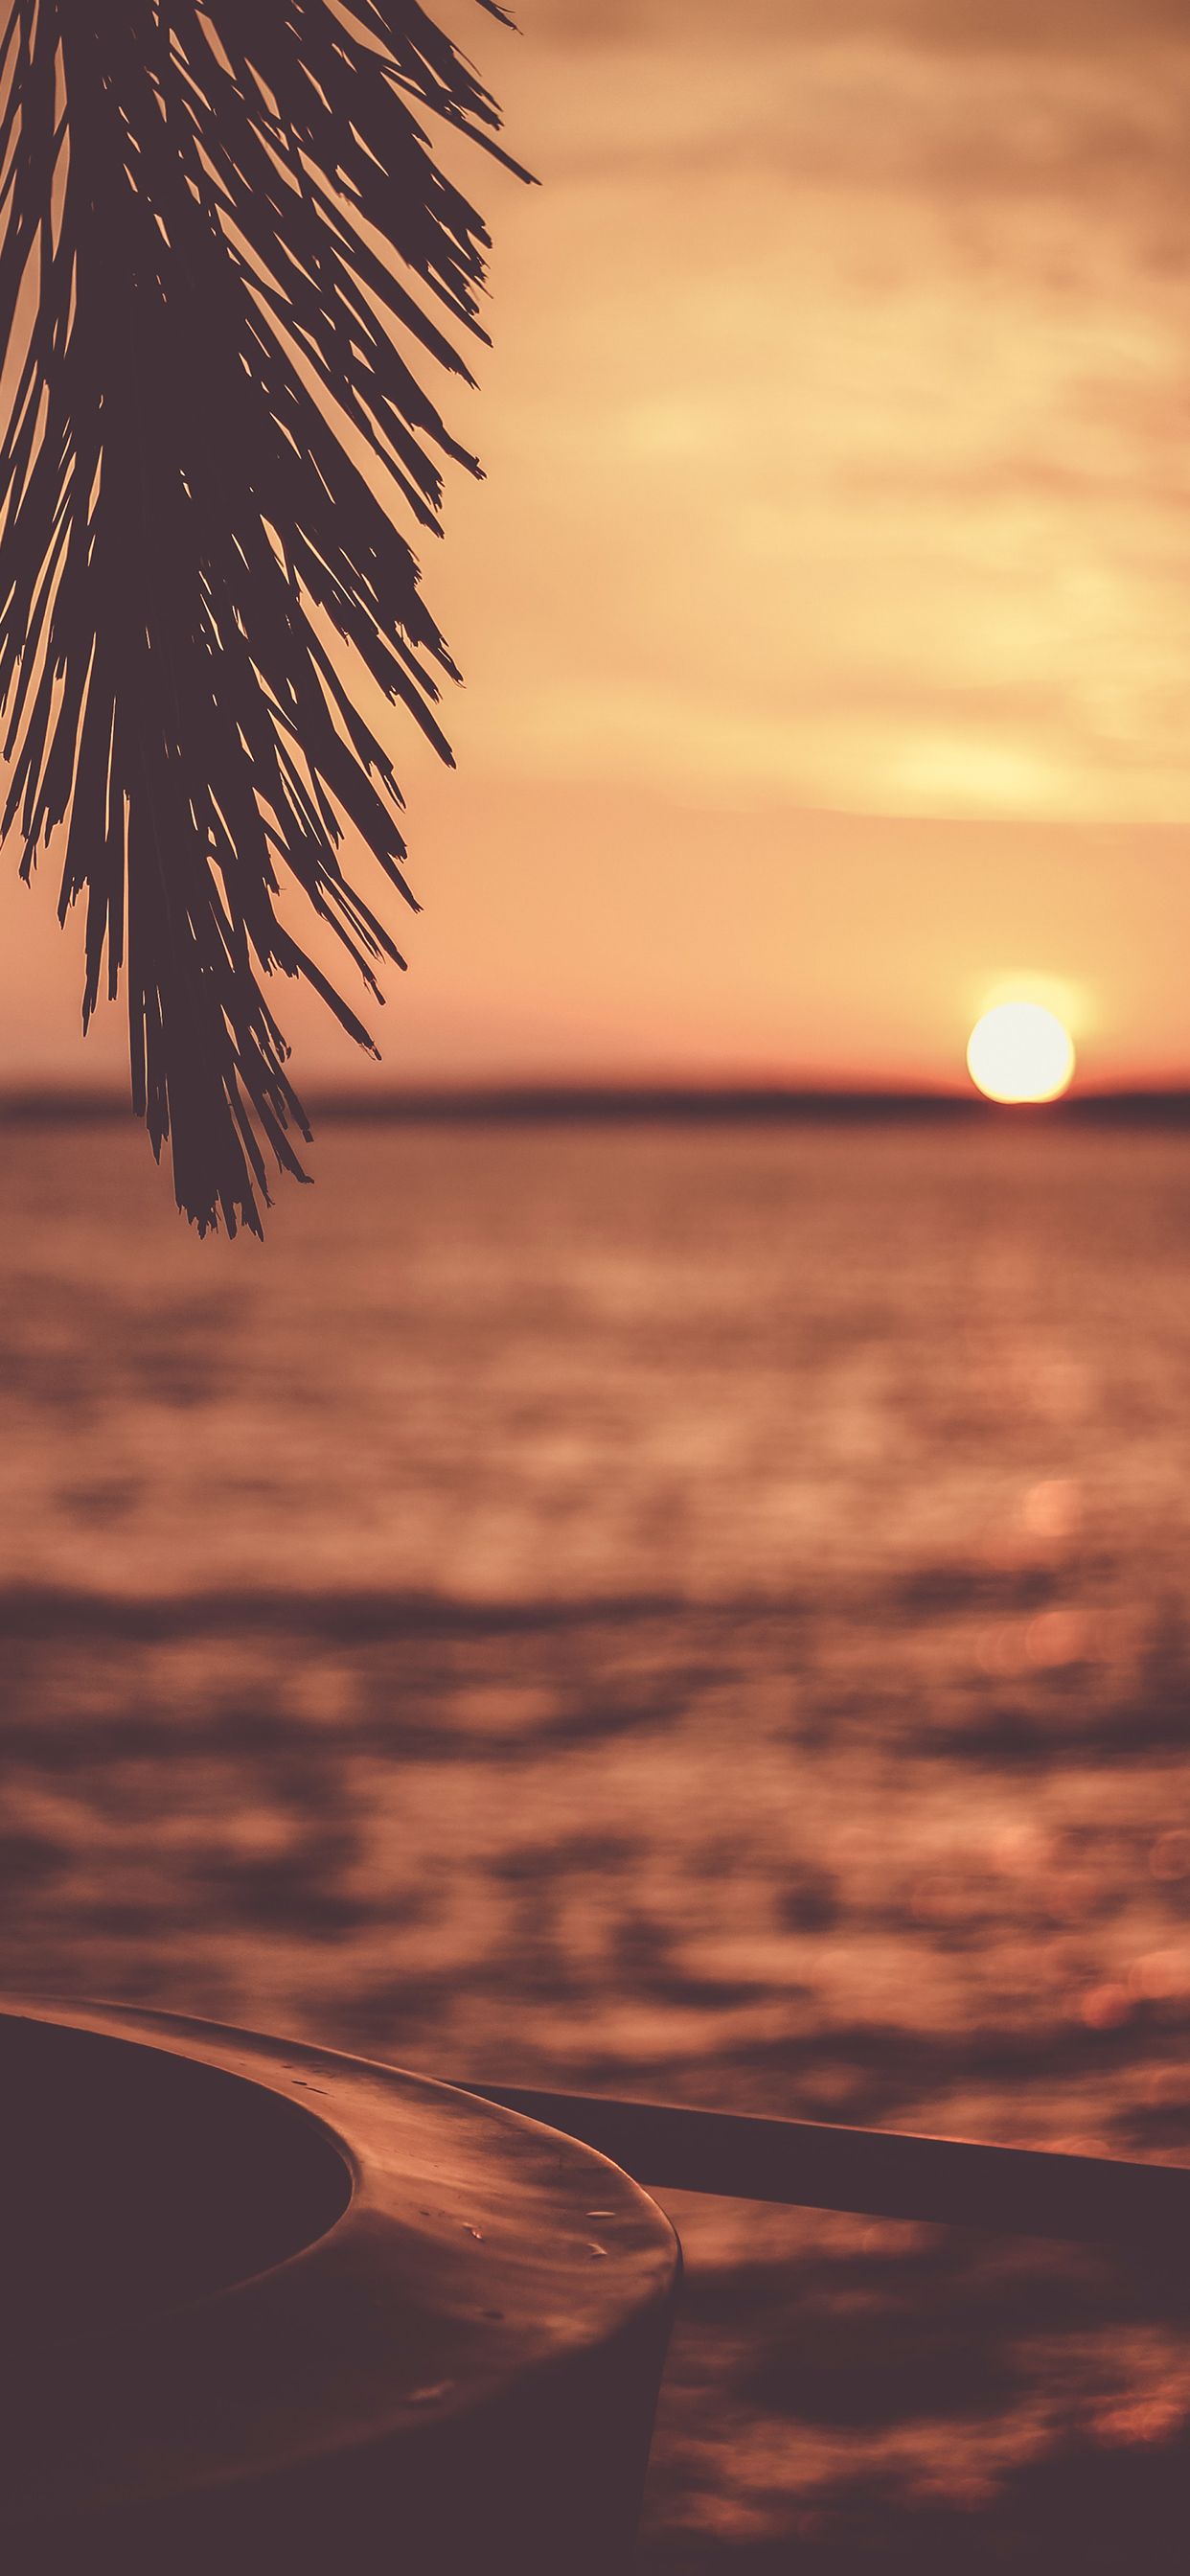 Sunset Backgrounds HD Free download 